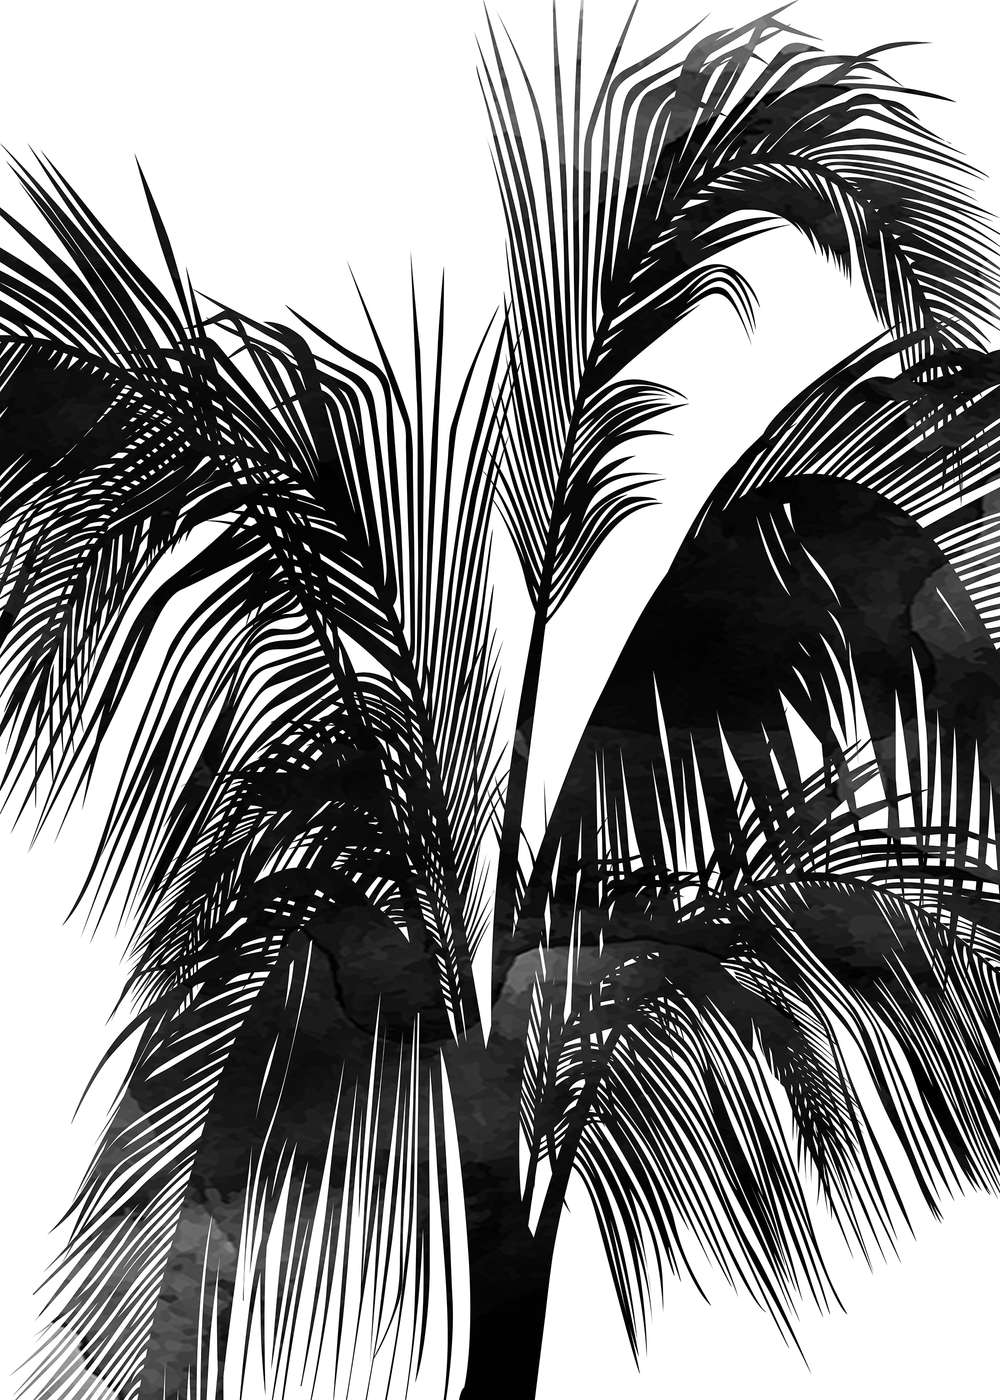             Black and white mural palm trees Sunset Boulevard
        